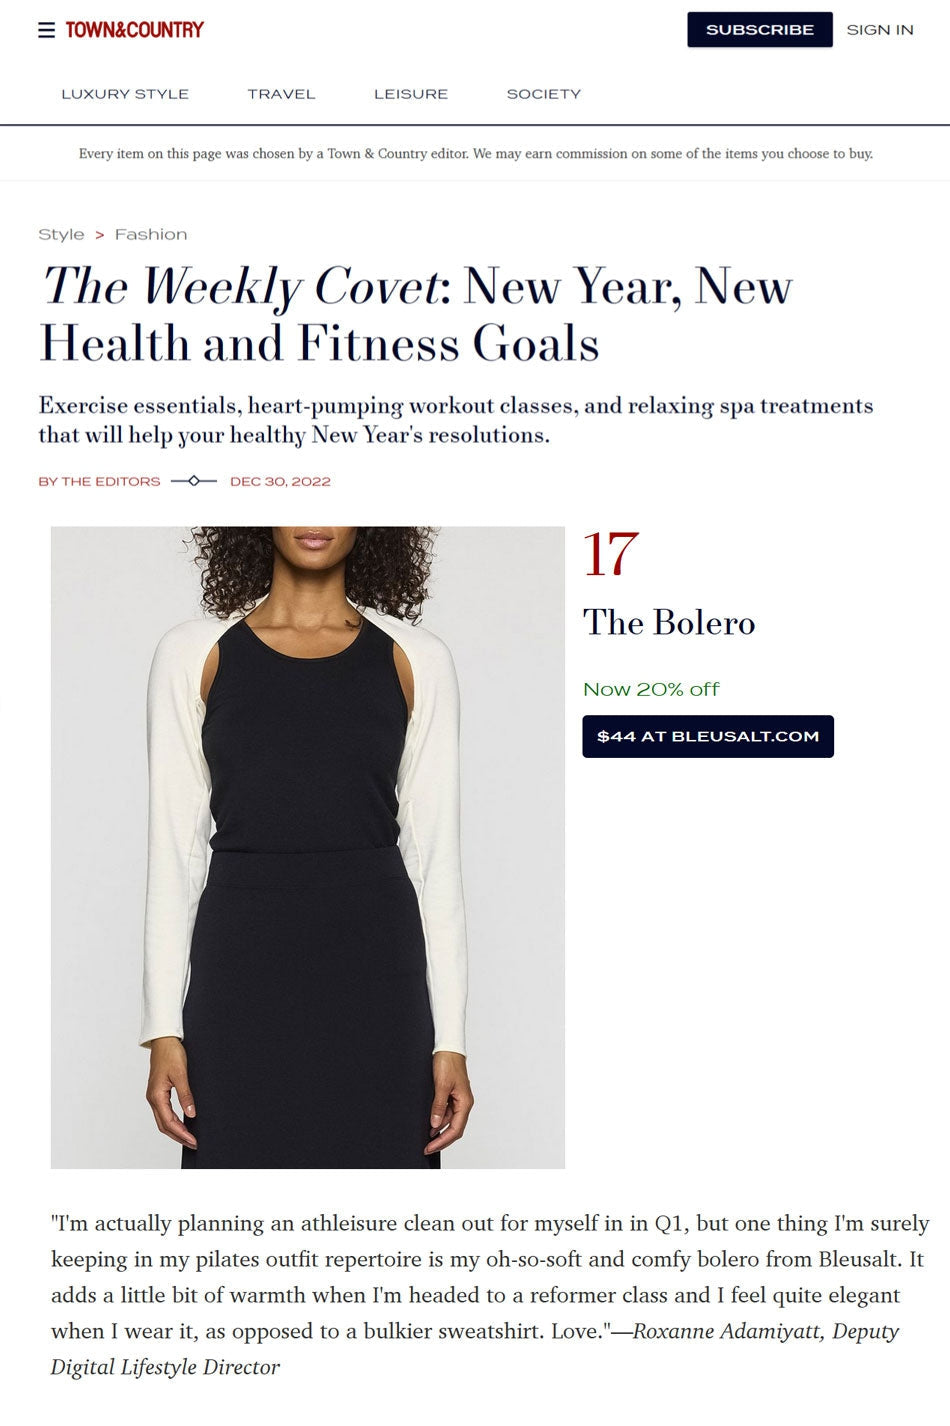 The Weekly Covet: New Year, New Health and Fitness Goals-Bleusalt